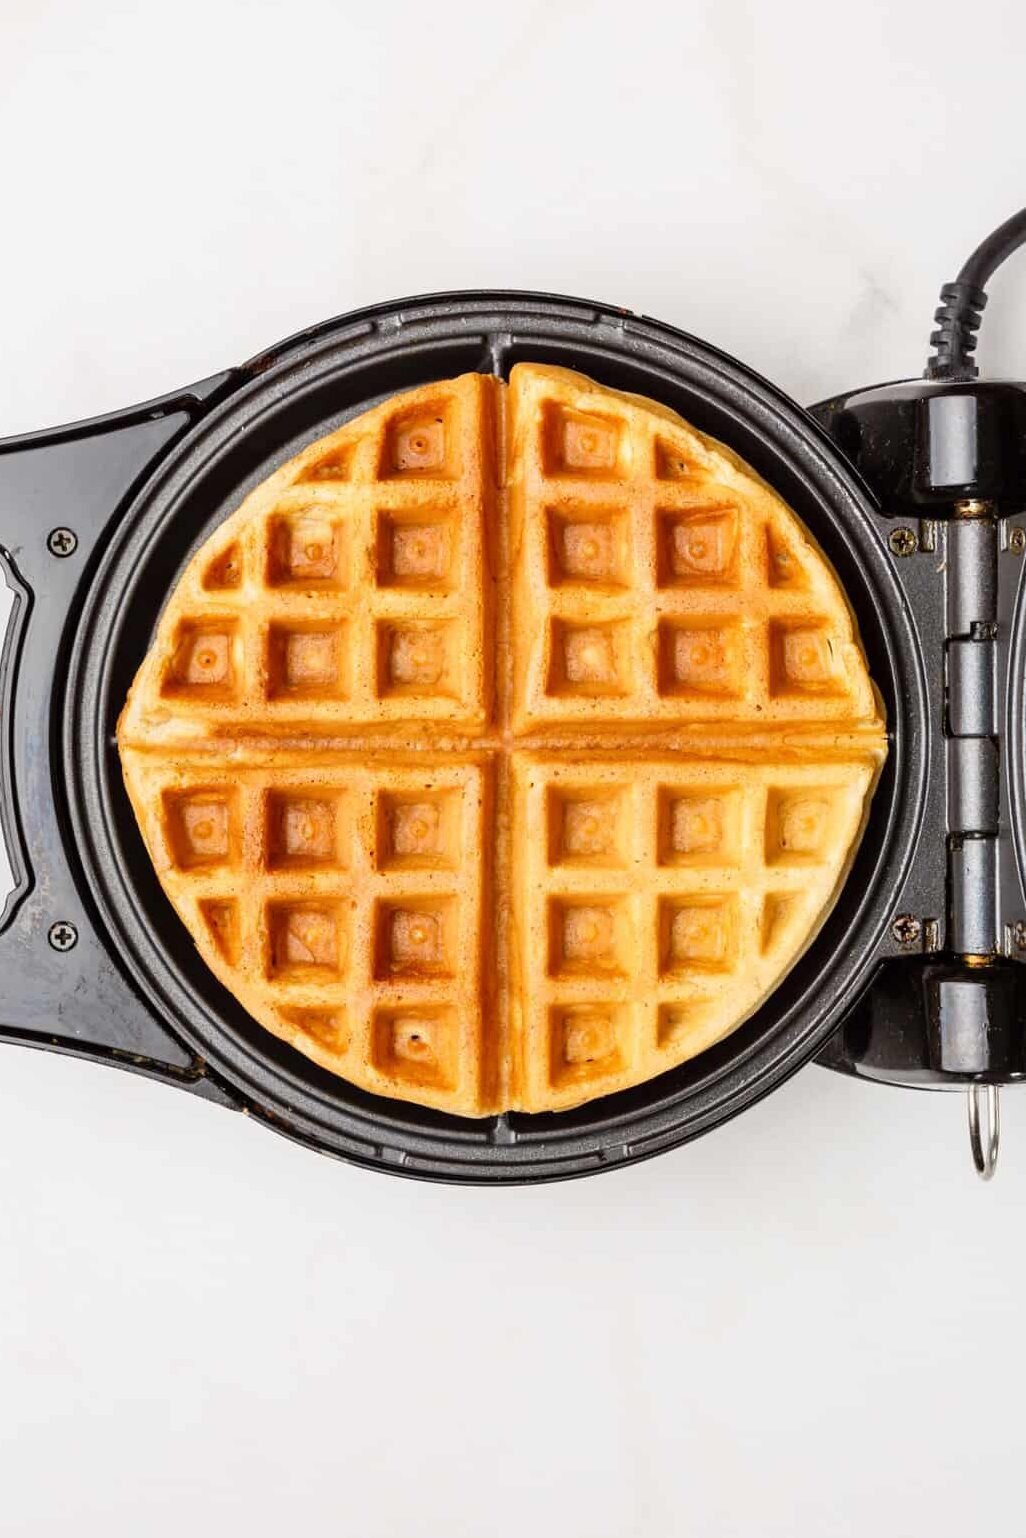 top down image of a cooked waffle in a waffle iron.